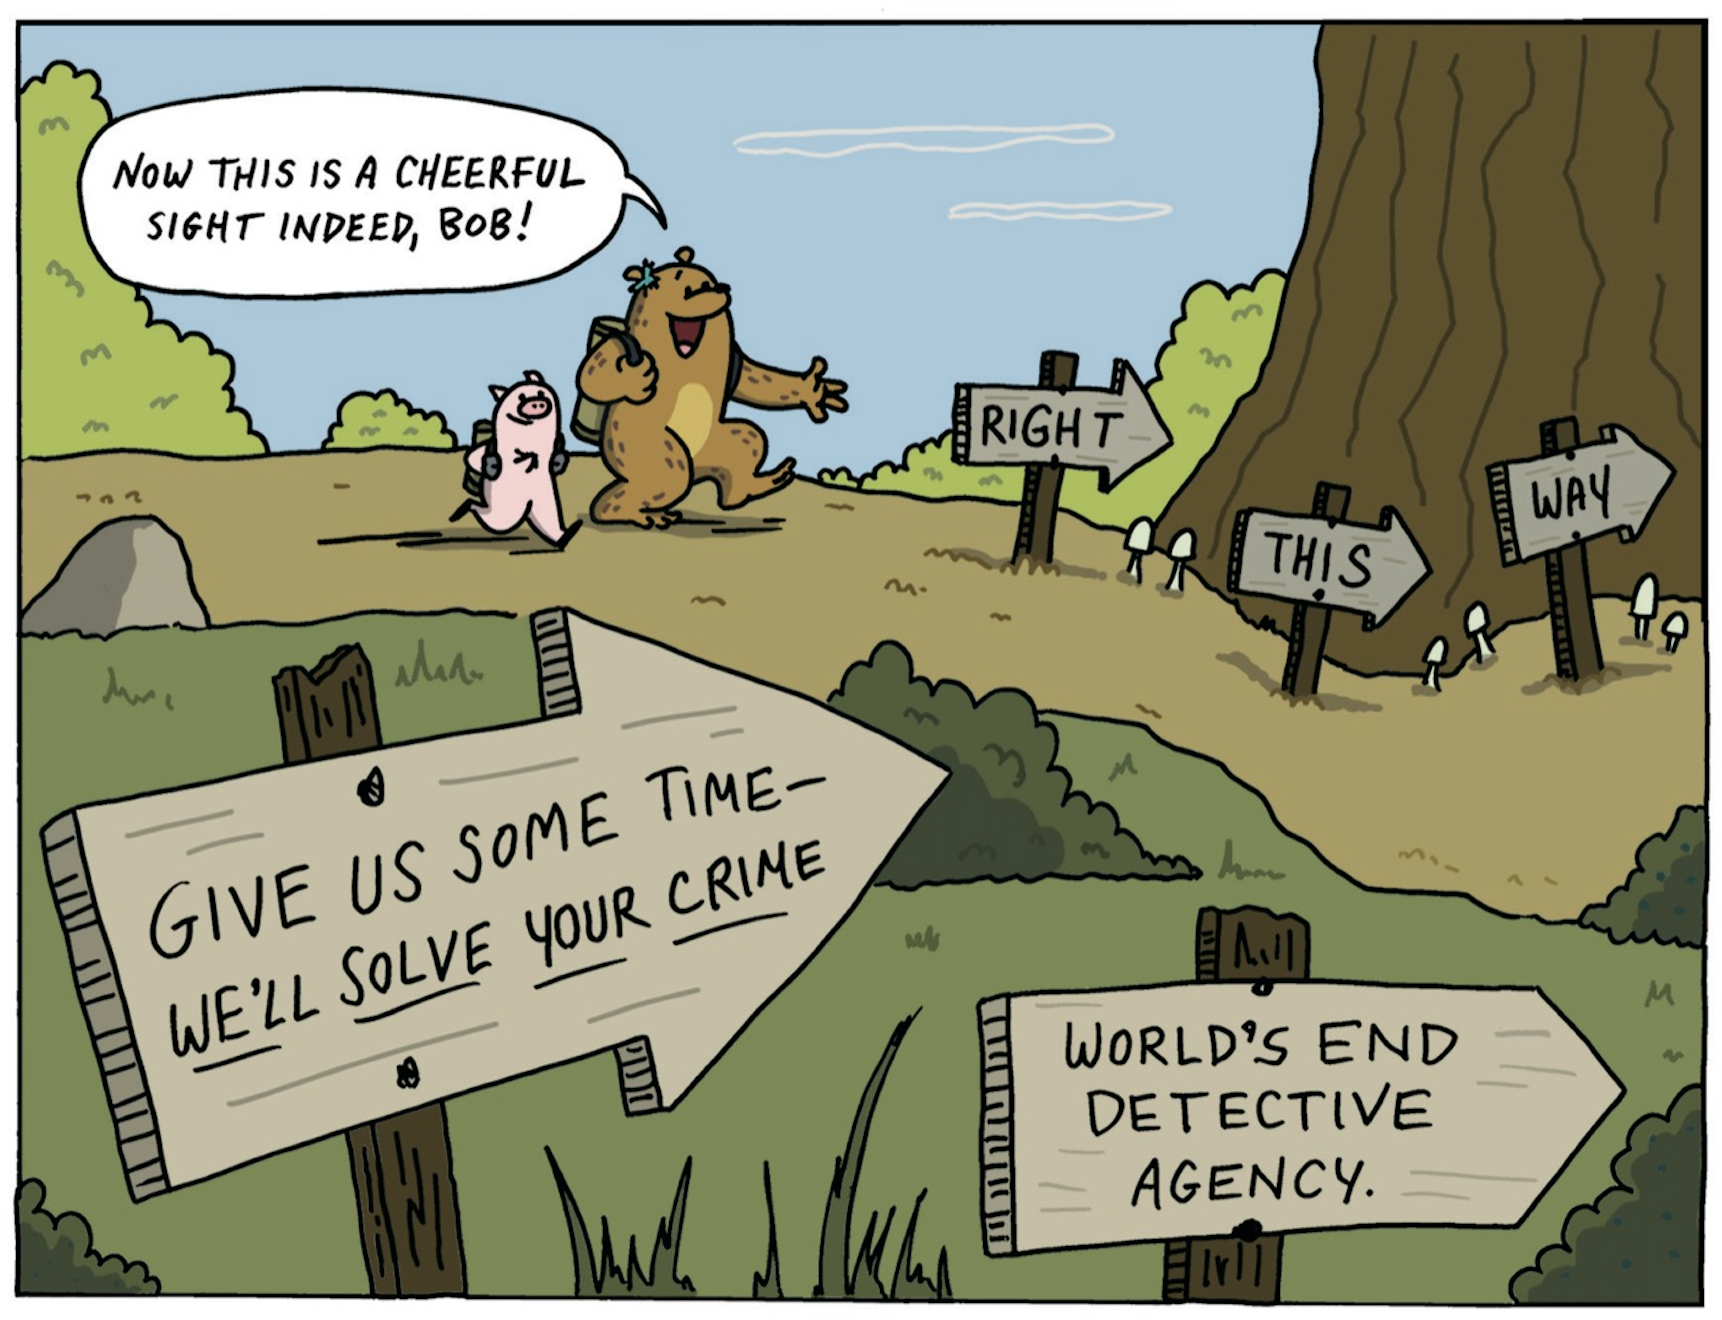 "Now this is a cheerful sight indeed, Bob!' An anthropomorphic bear and pig are walking along a woodsy path following signs that say "Right this way," "Give us some timeâ€”we'll solve your crime," and the title, "World's End Detective Agency."